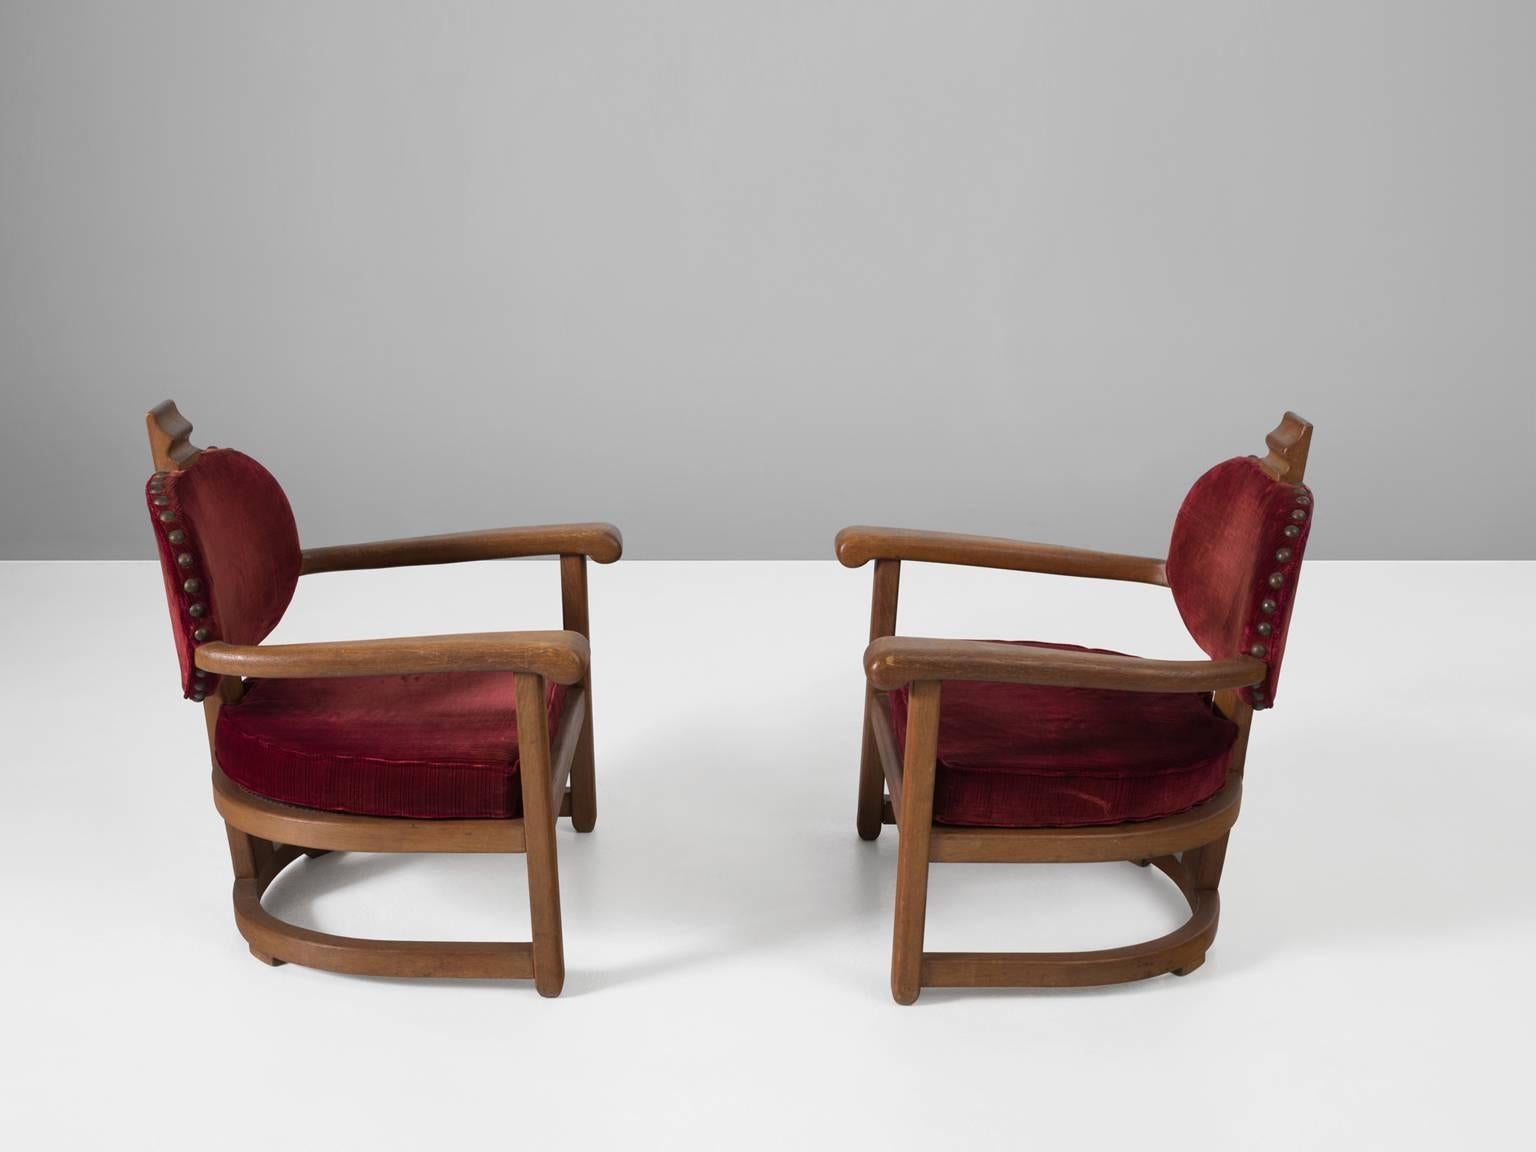 European Set of two Art Deco Lounge Chairs in Solid Oak and Red Upholstery